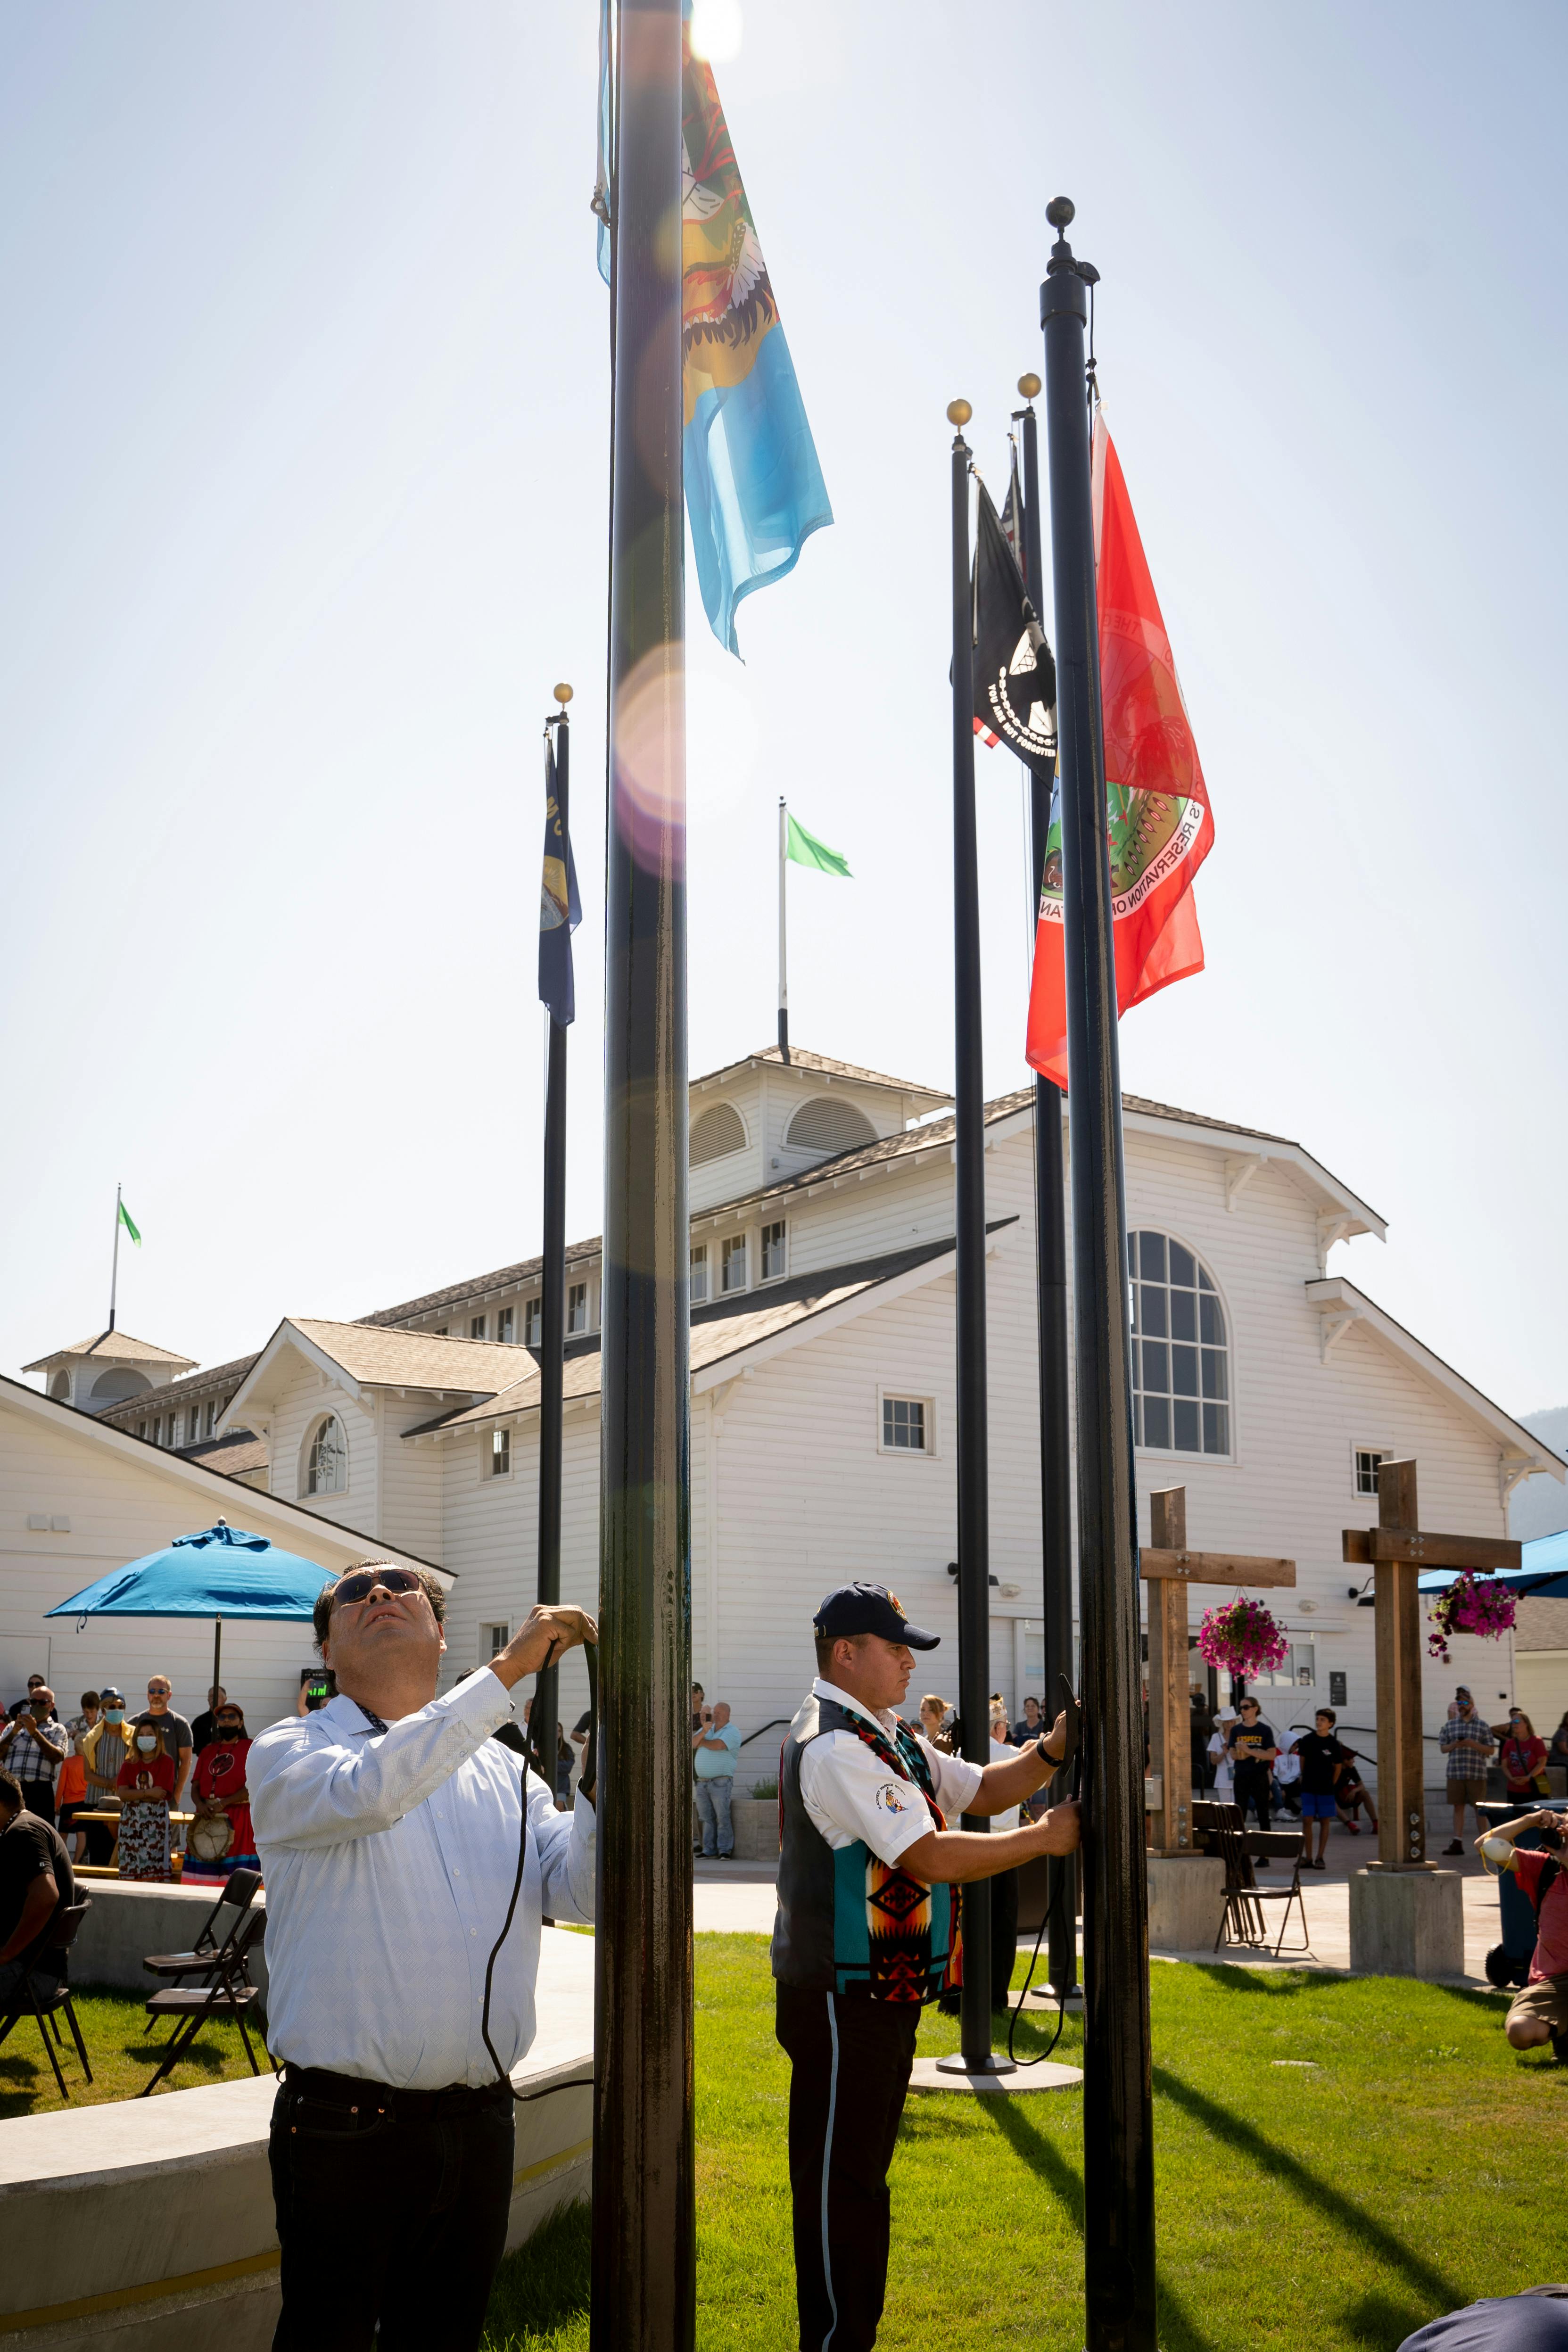 The different Tribal Nations raising their flags in the Historic Plaza on a sunny day at the Fair.